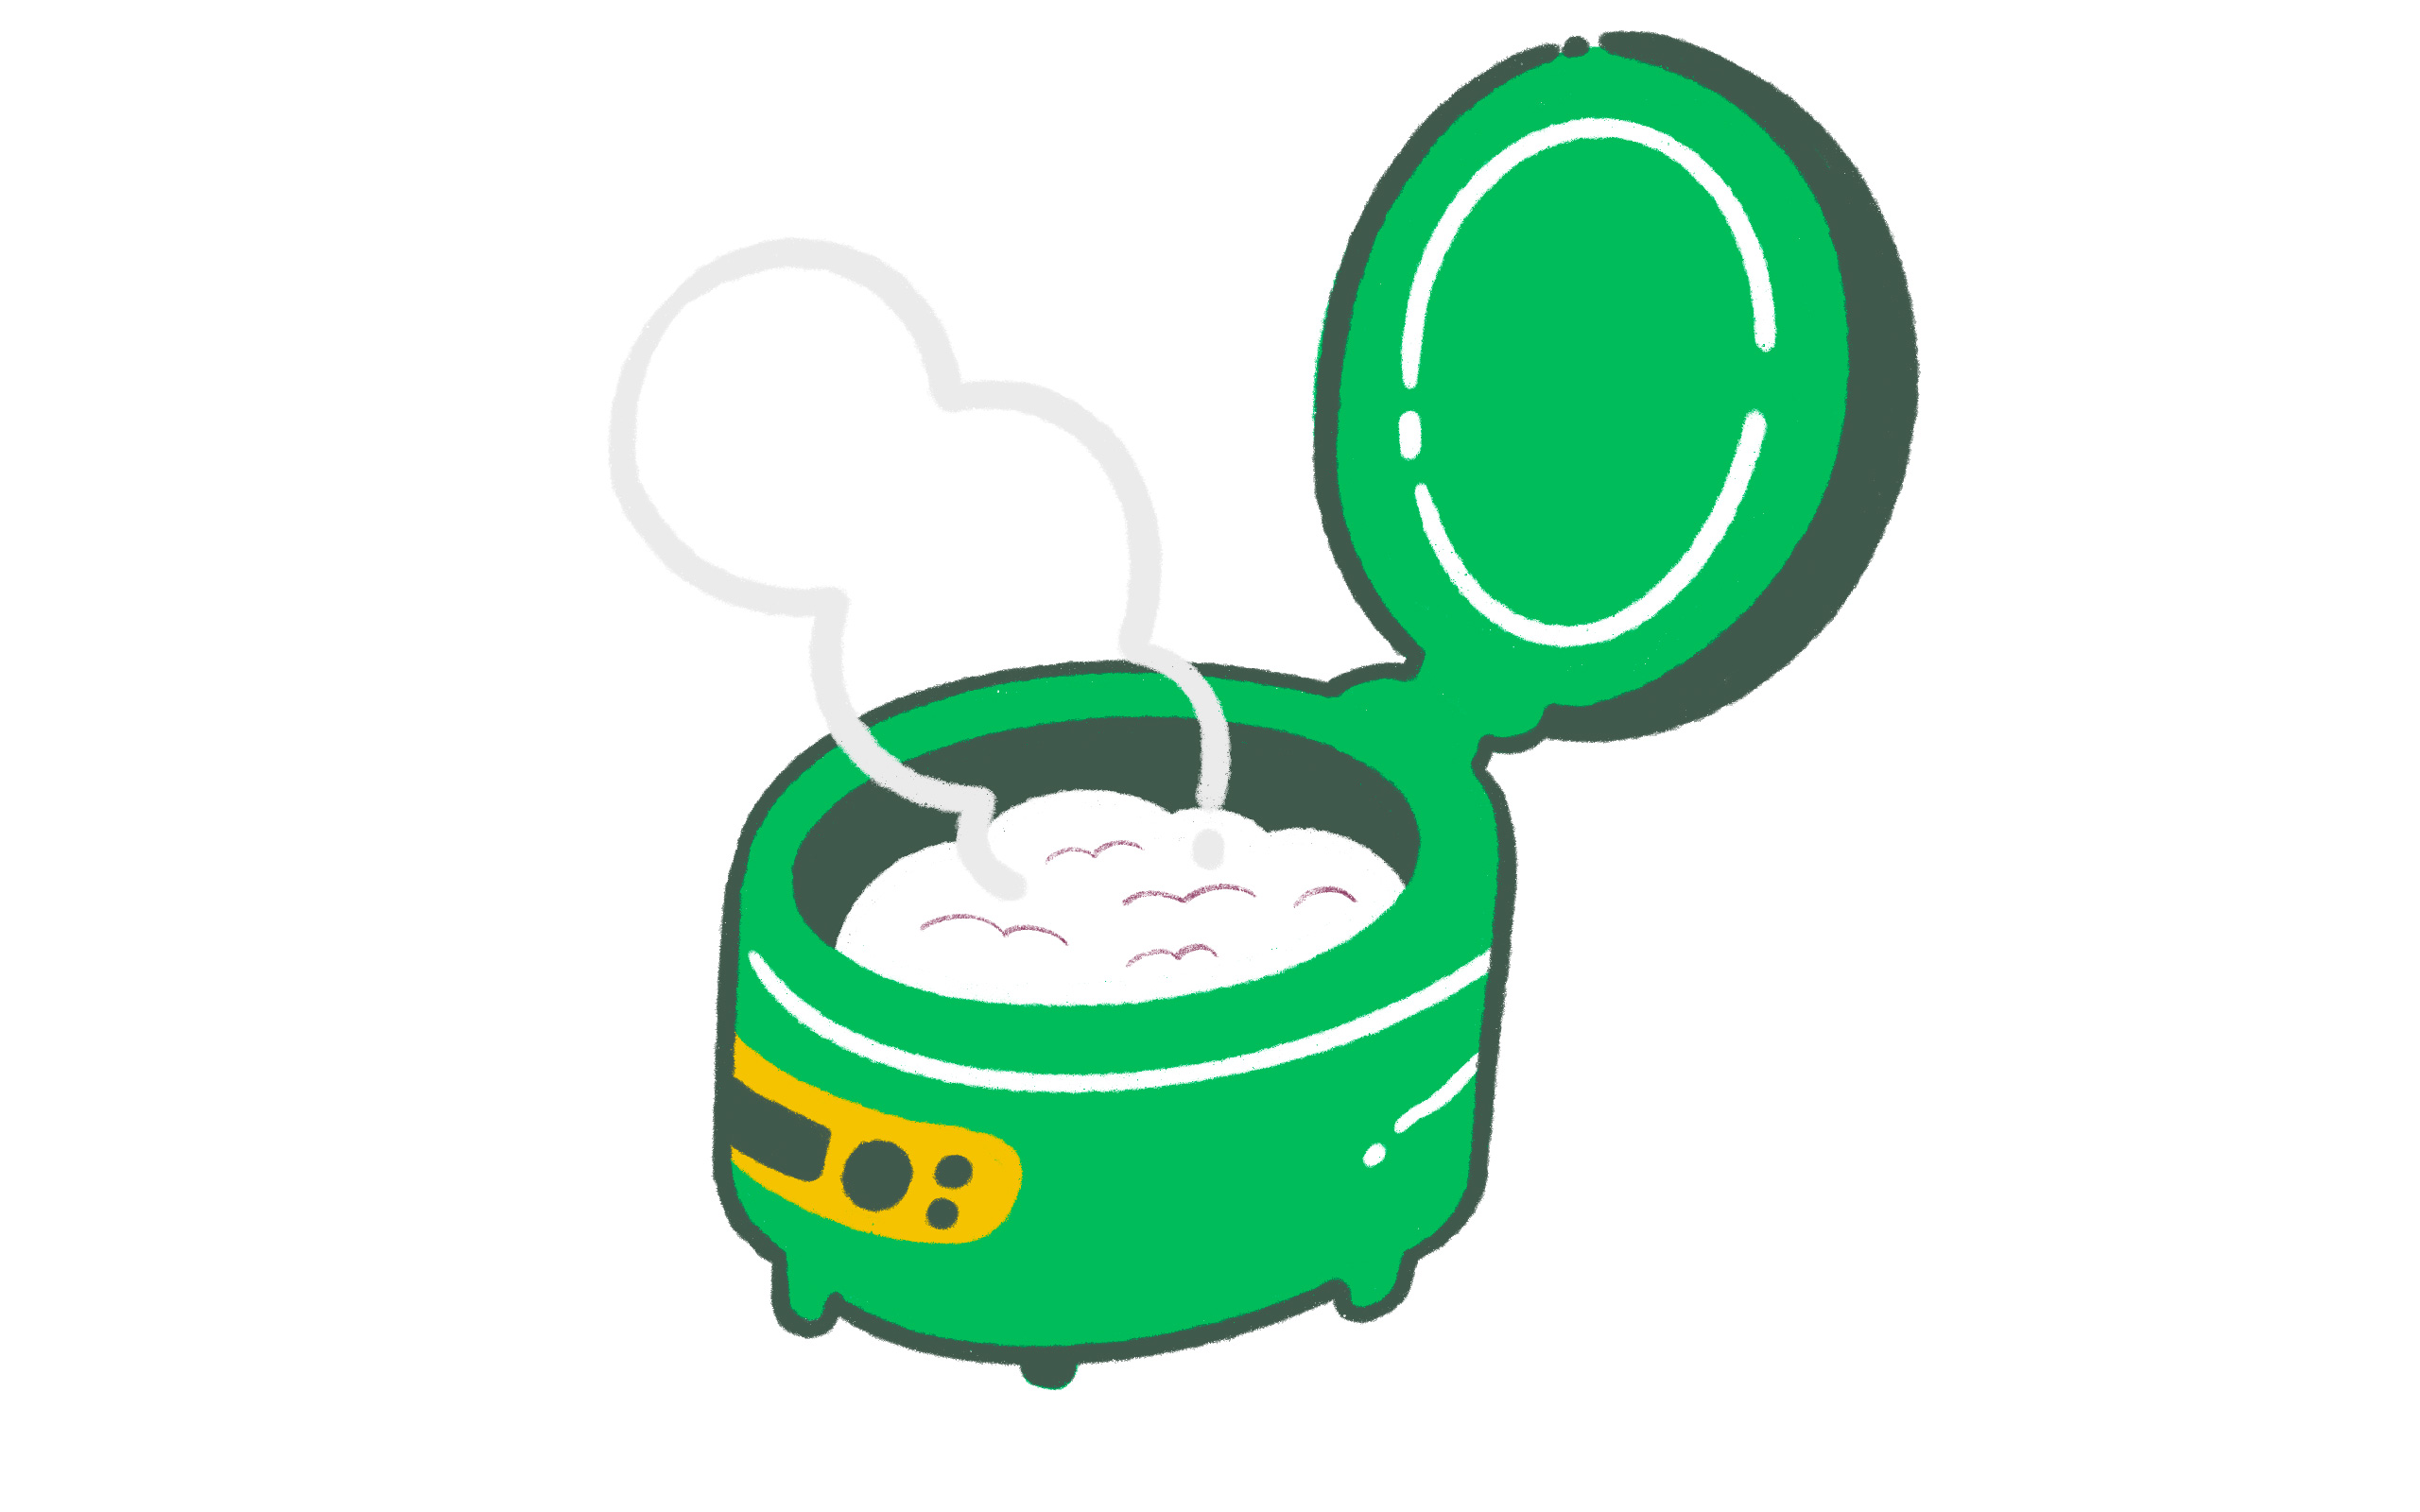 a rice cooker